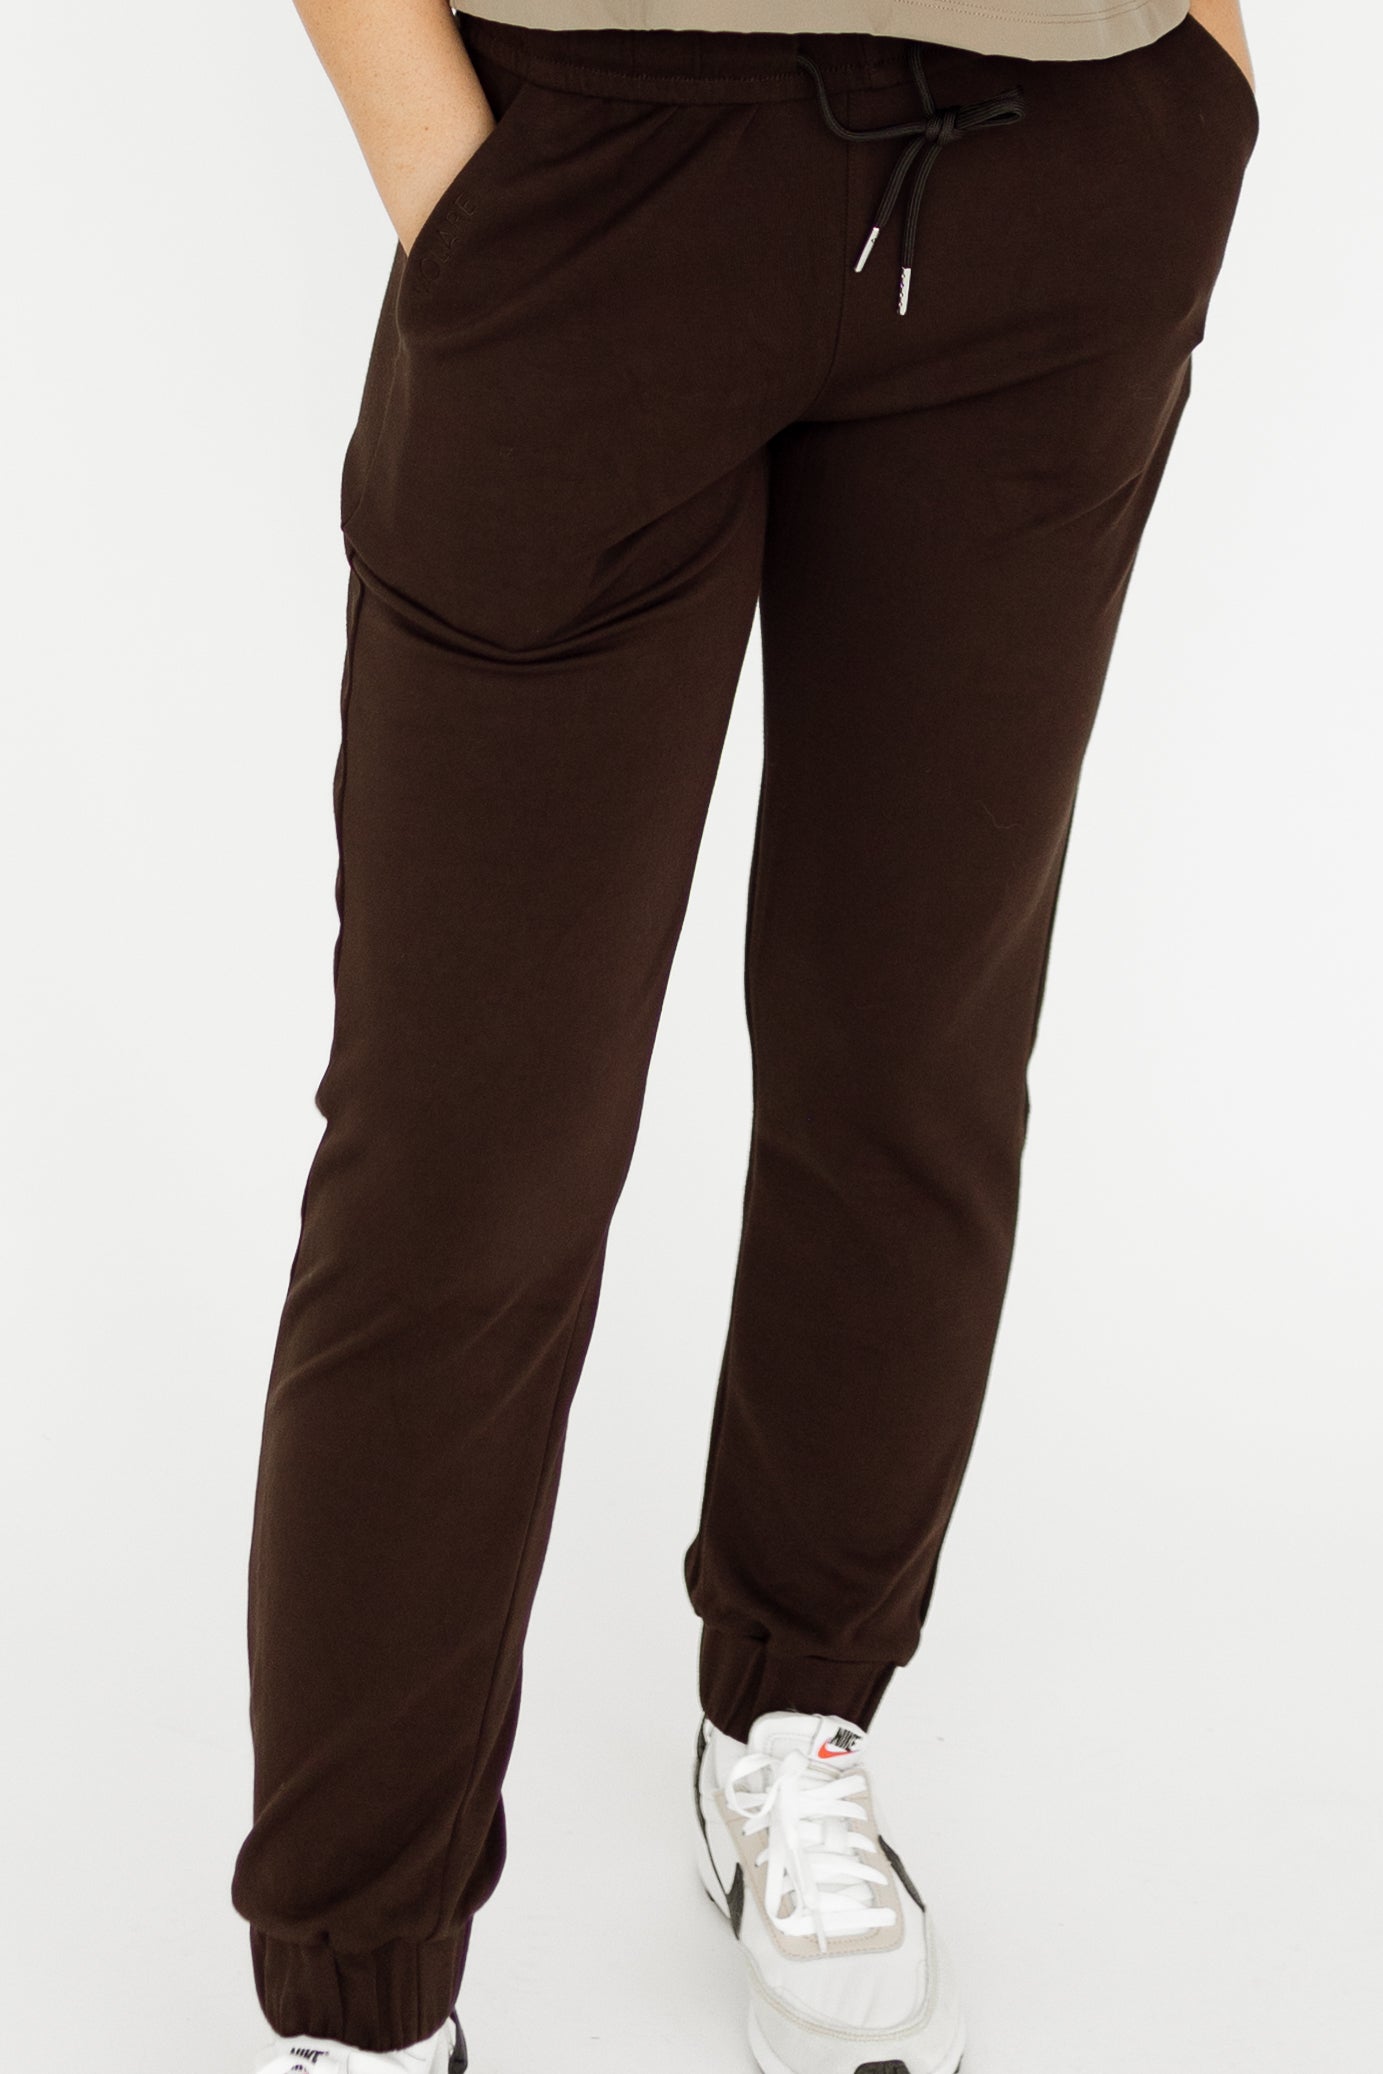 Cocoa Brown Jogger Set with Elastic at the ankle. Luxury fabric and flattering fit.